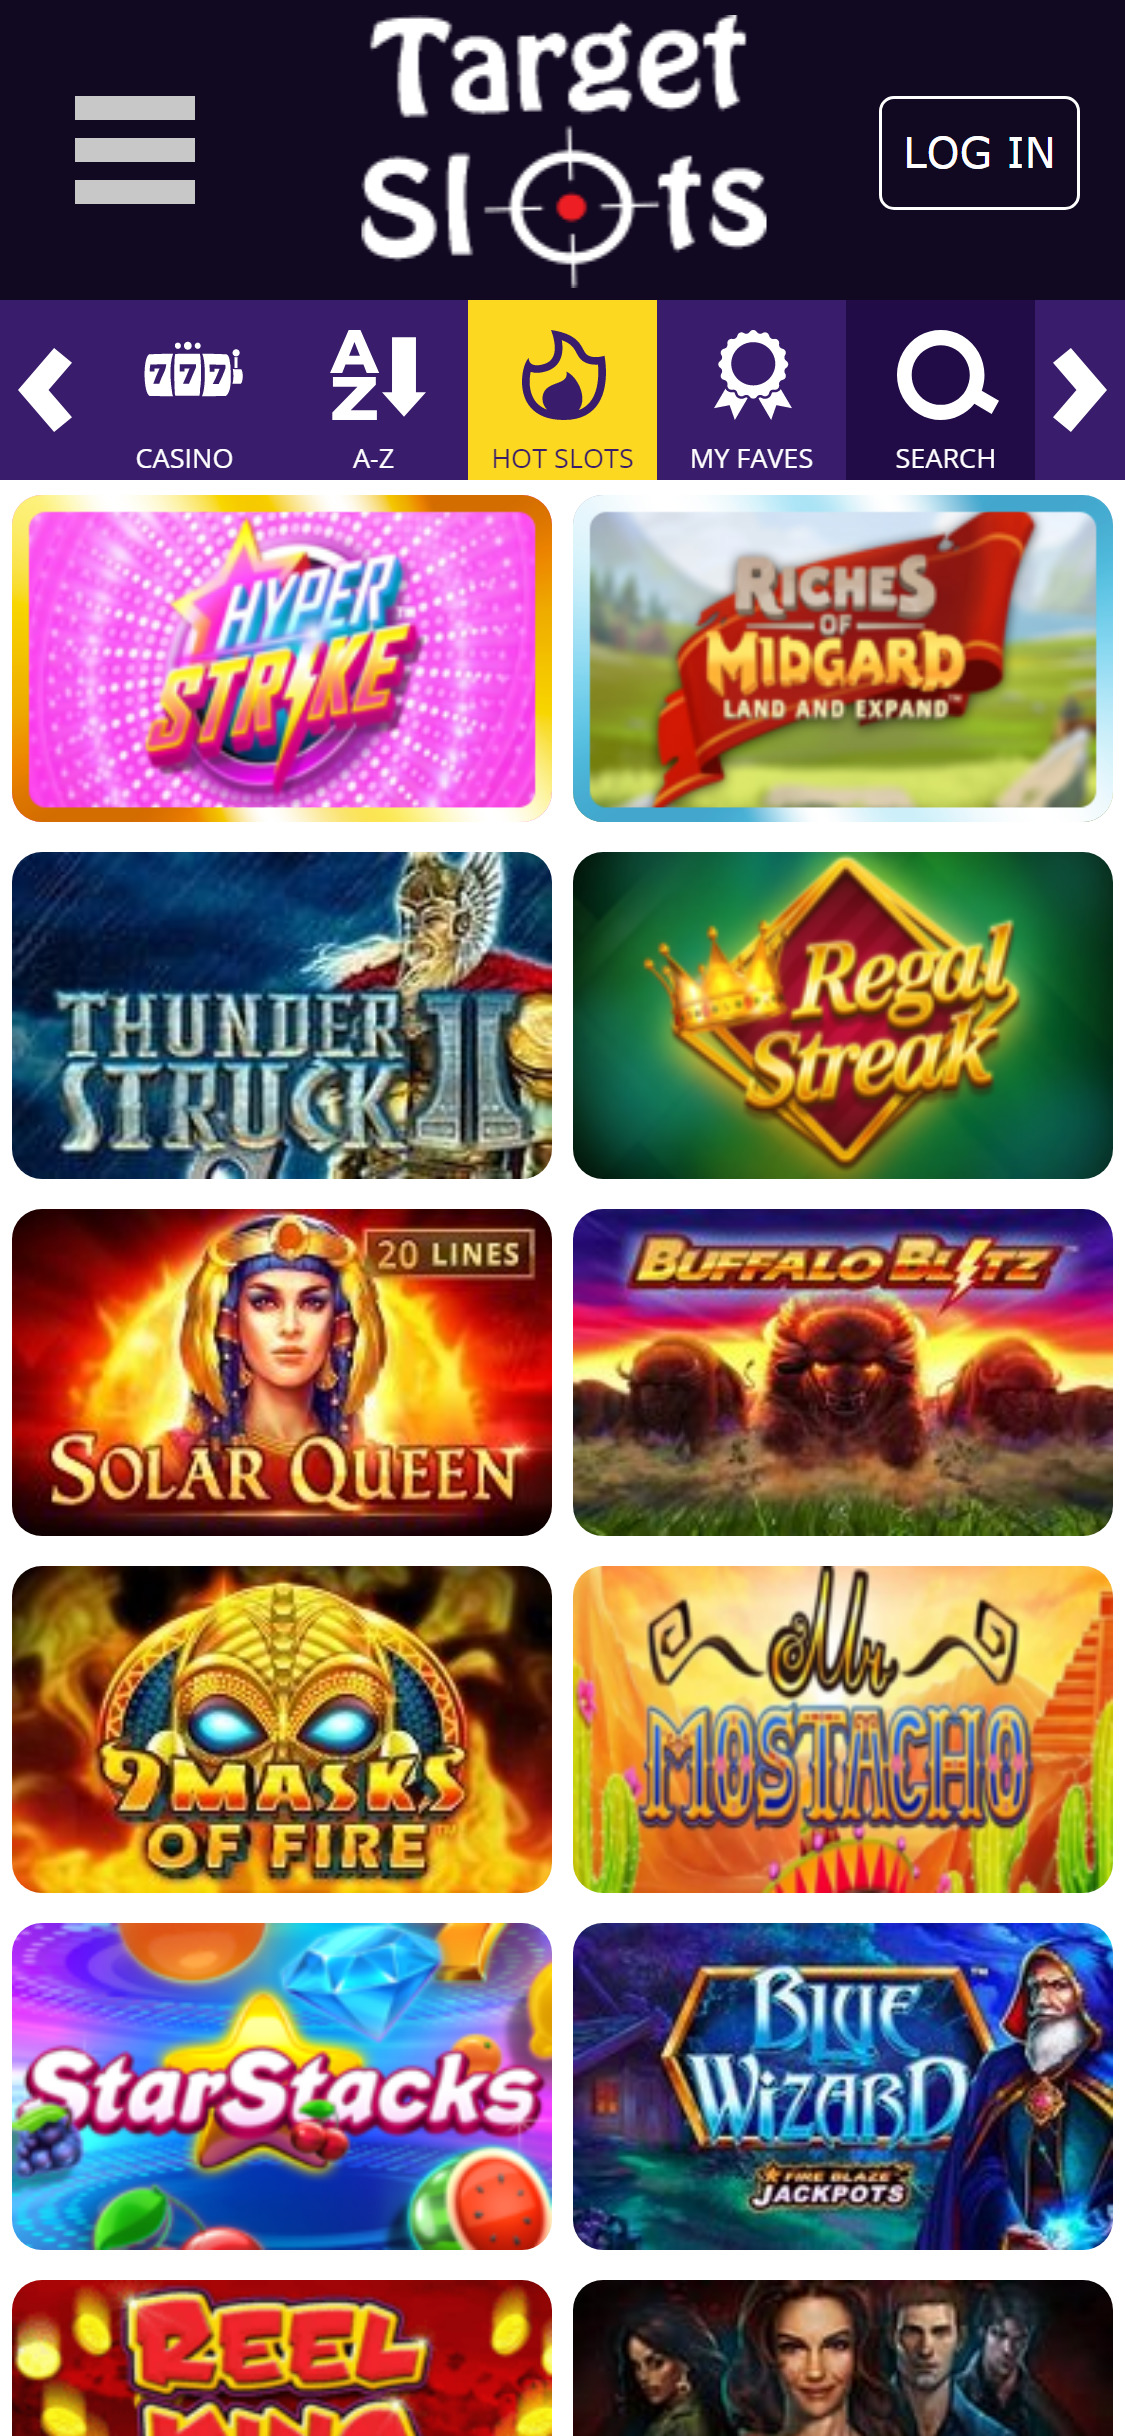 Target Slots Casino Mobile Games Review